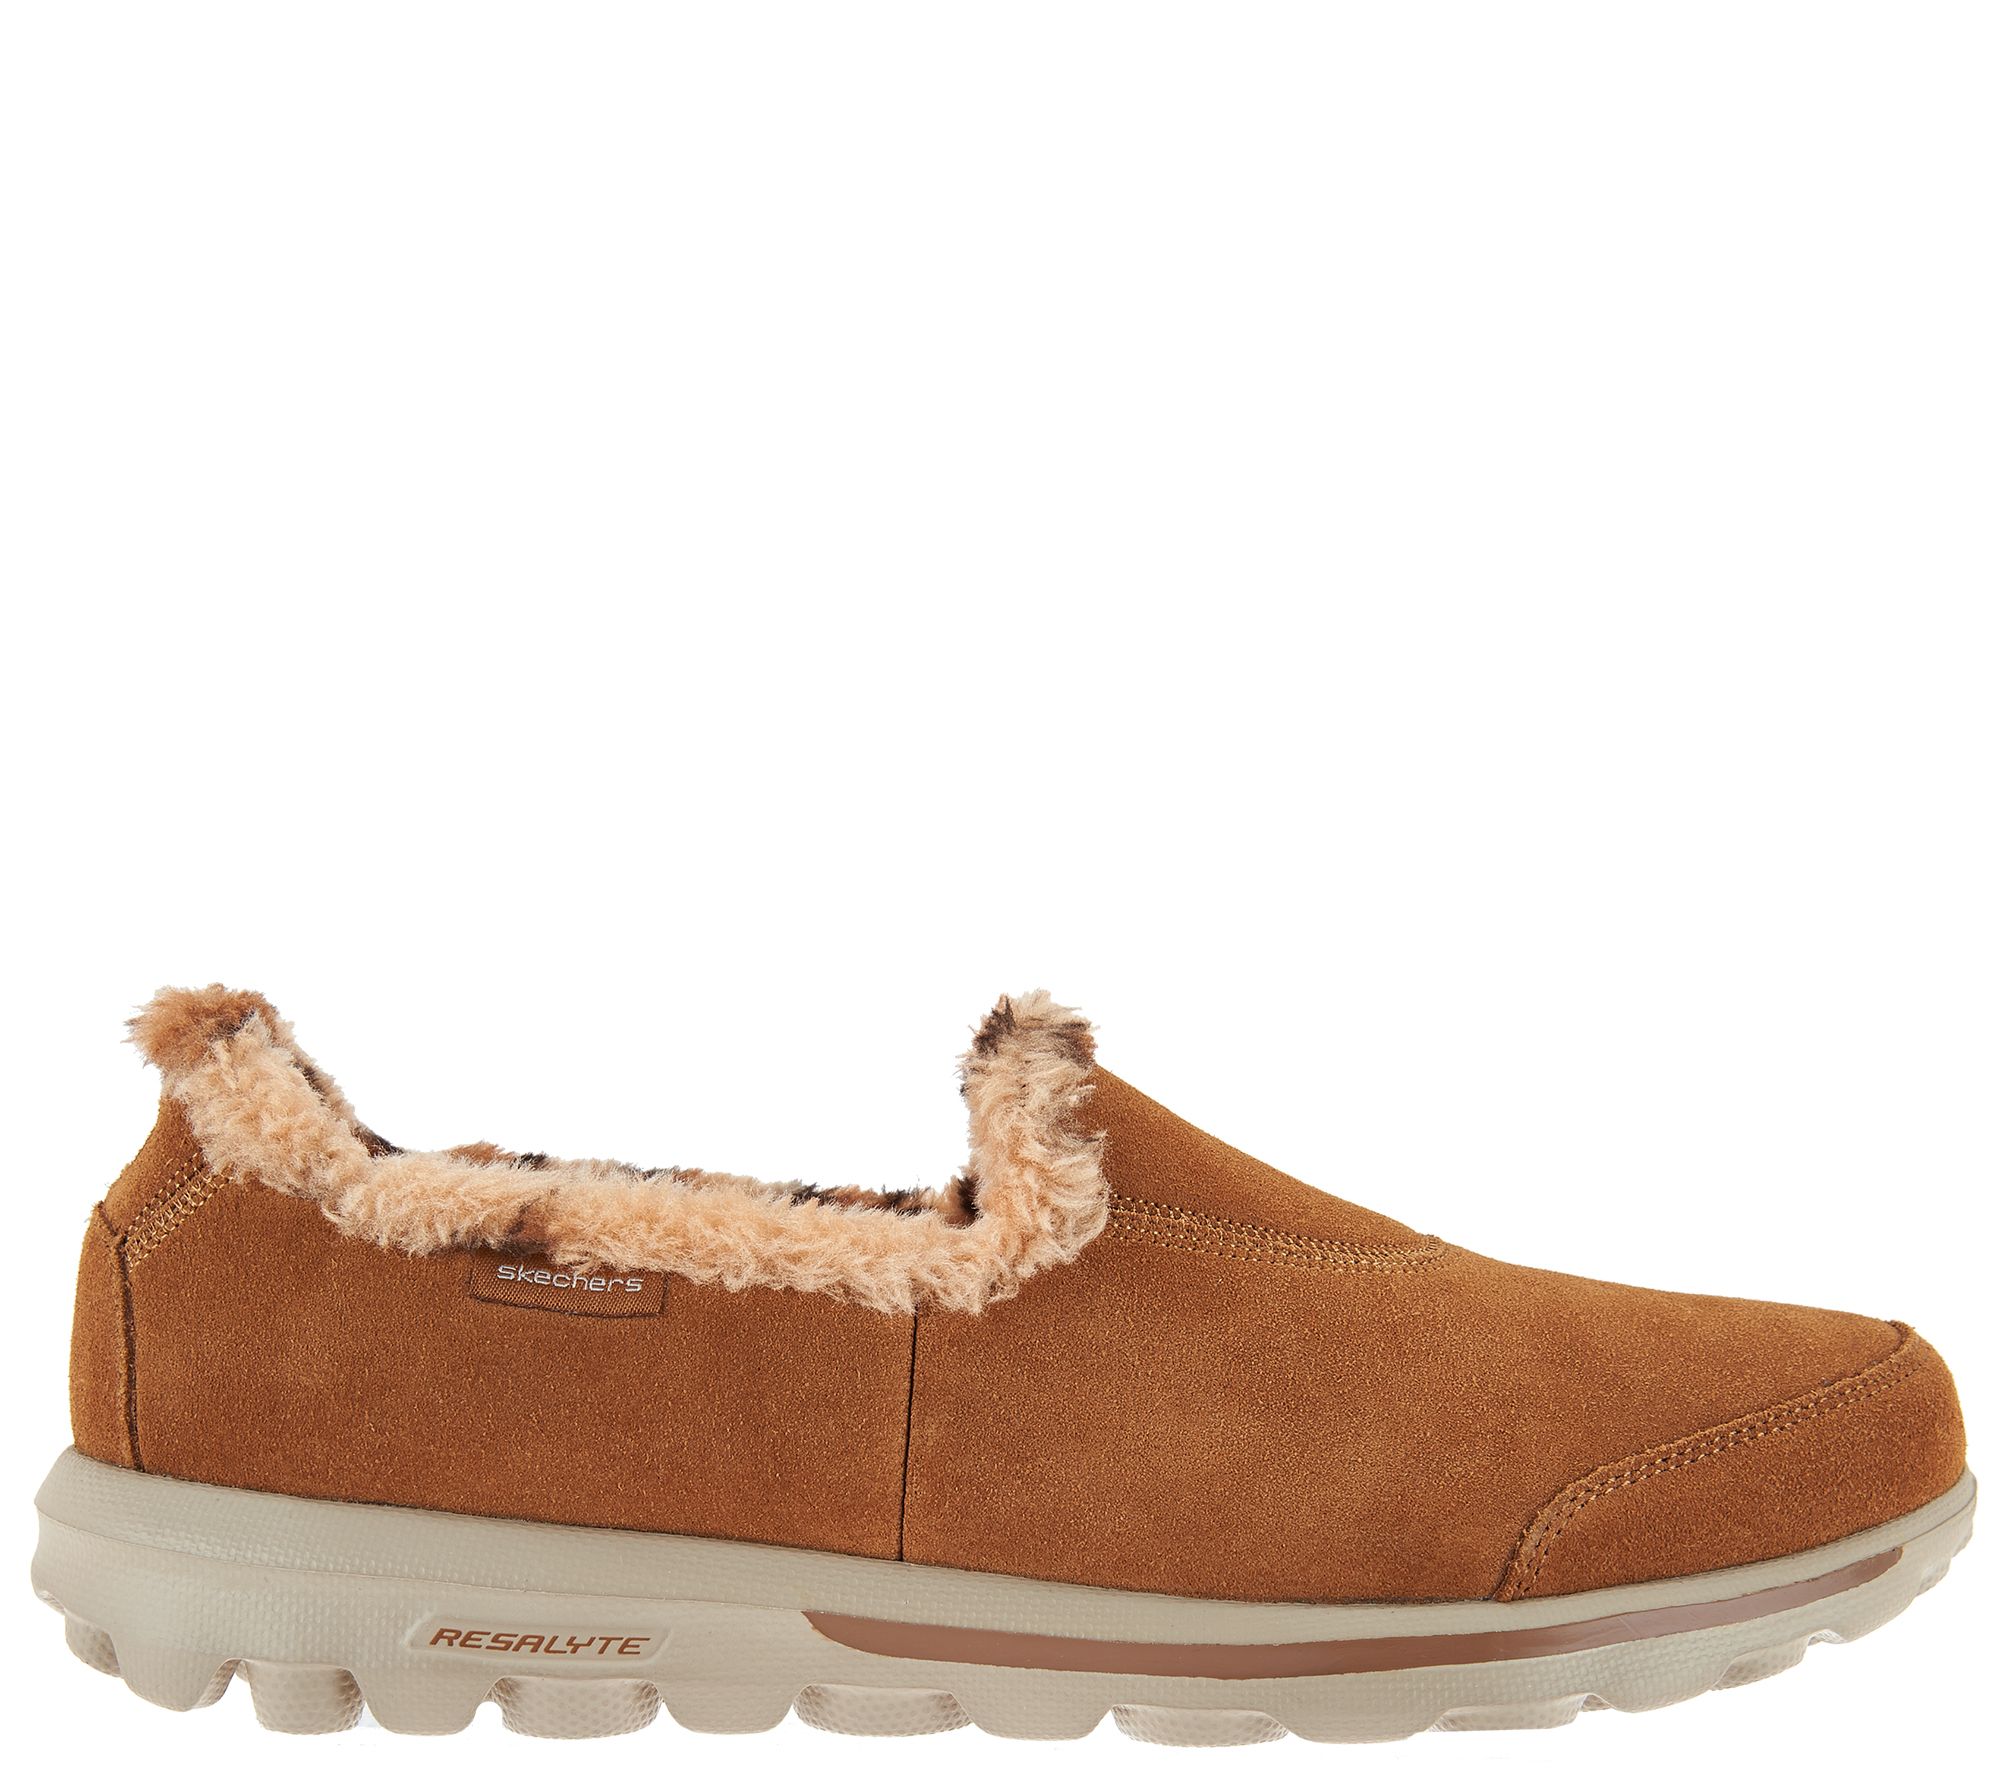 skechers gowalk suede clogs with faux fur lining